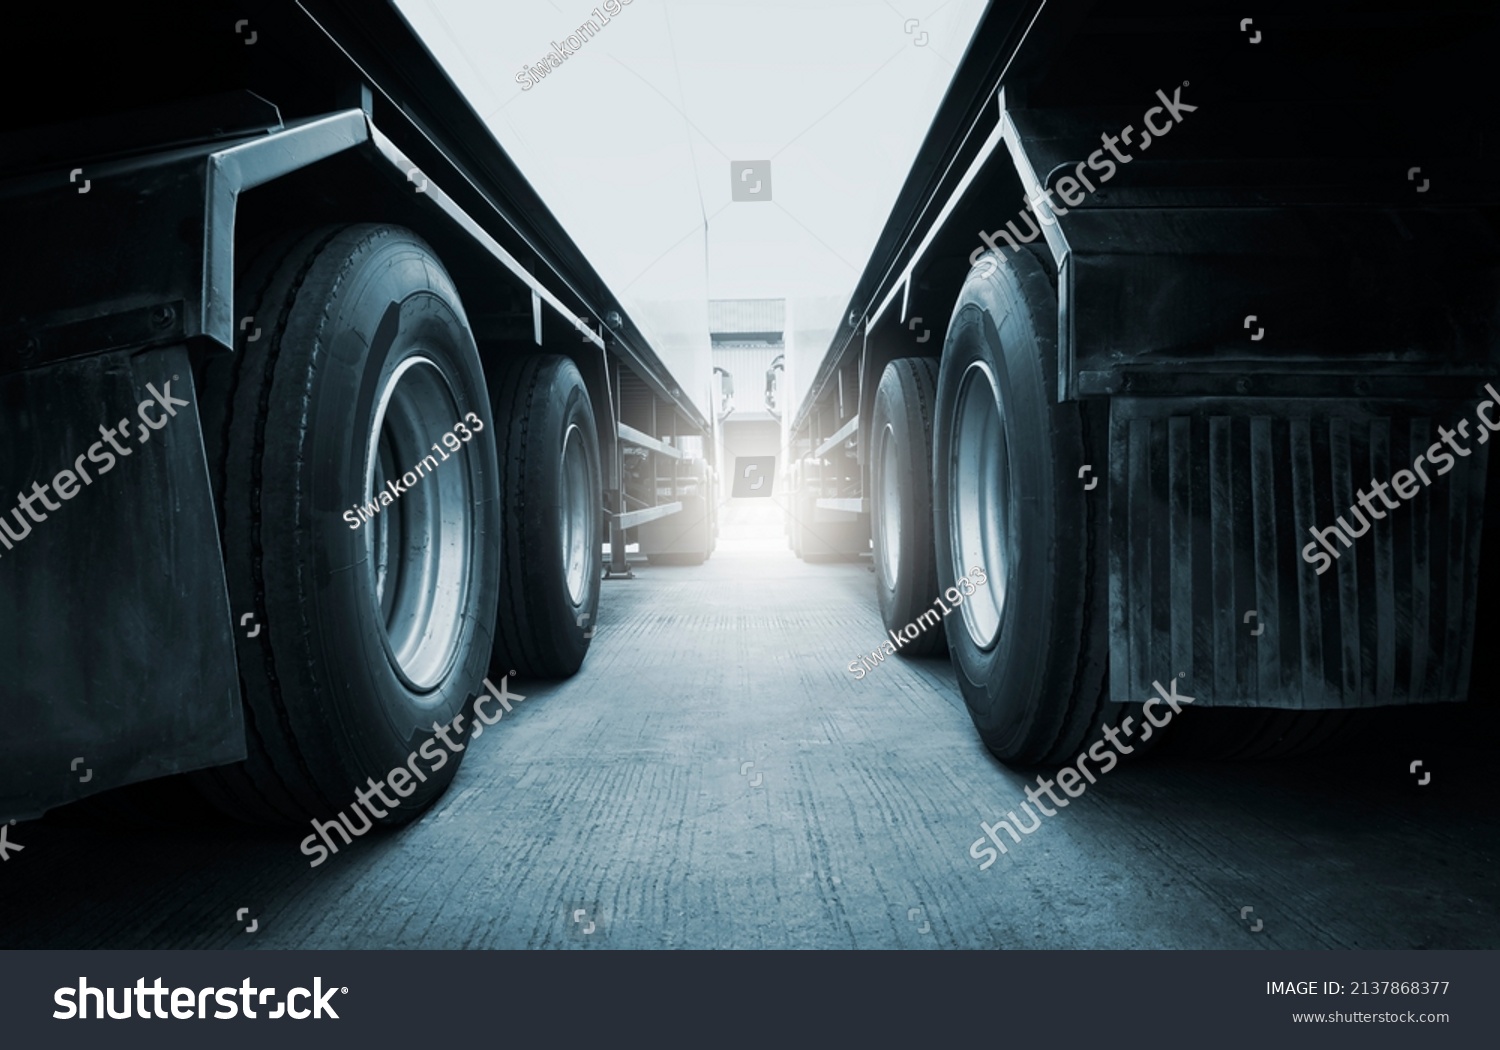 Semi Trailer Trucks on Parking  at Warehouse. Big Rig Semi Truck Wheels Tires. Auto Service Shop. Shipping Trucks. Lorry Tractor. Industry Freight Truck Logistics Cargo Transport.	 #2137868377